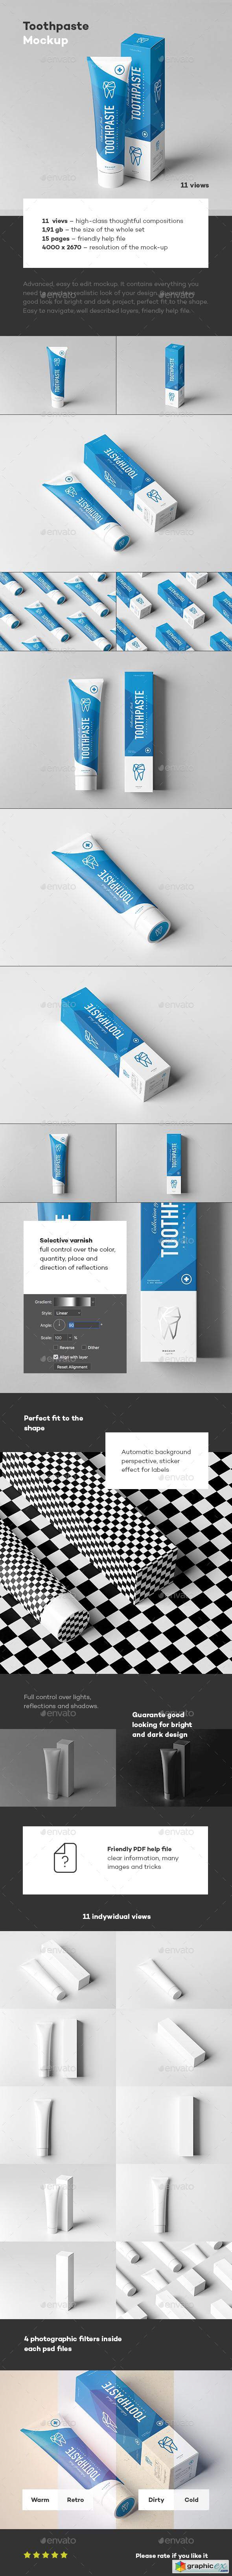 Toothpaste Mock-up